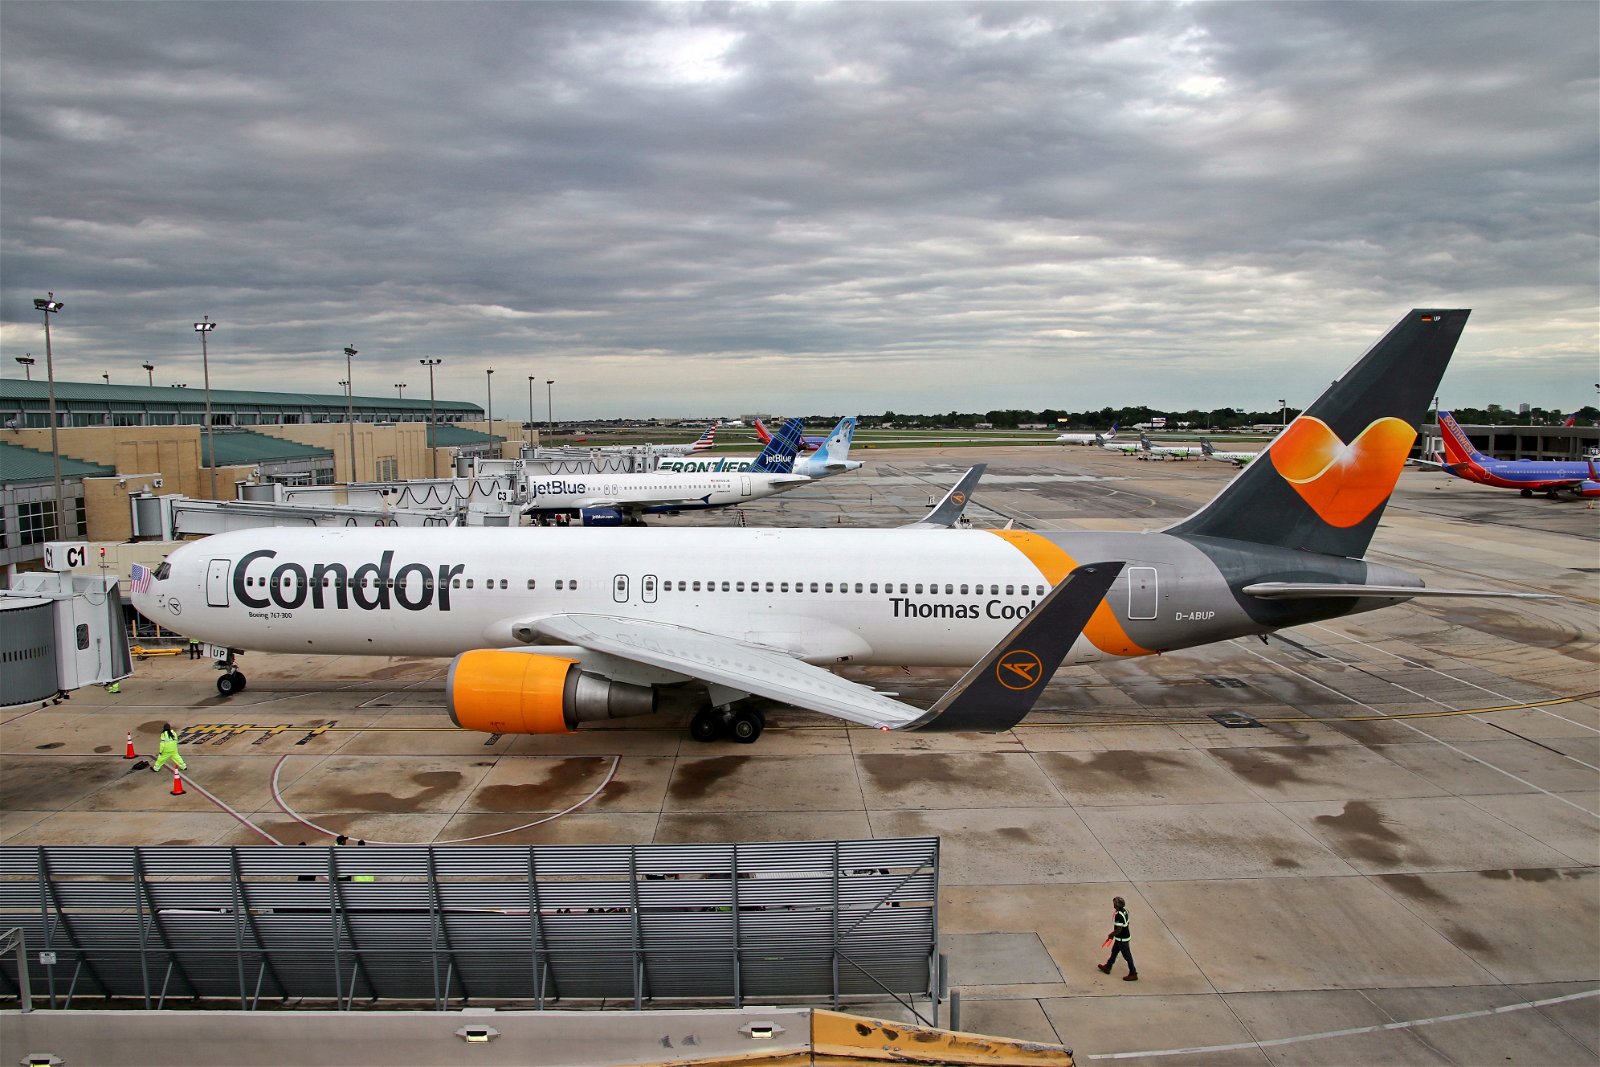 A Condor 767 after arriving in New Orleans.